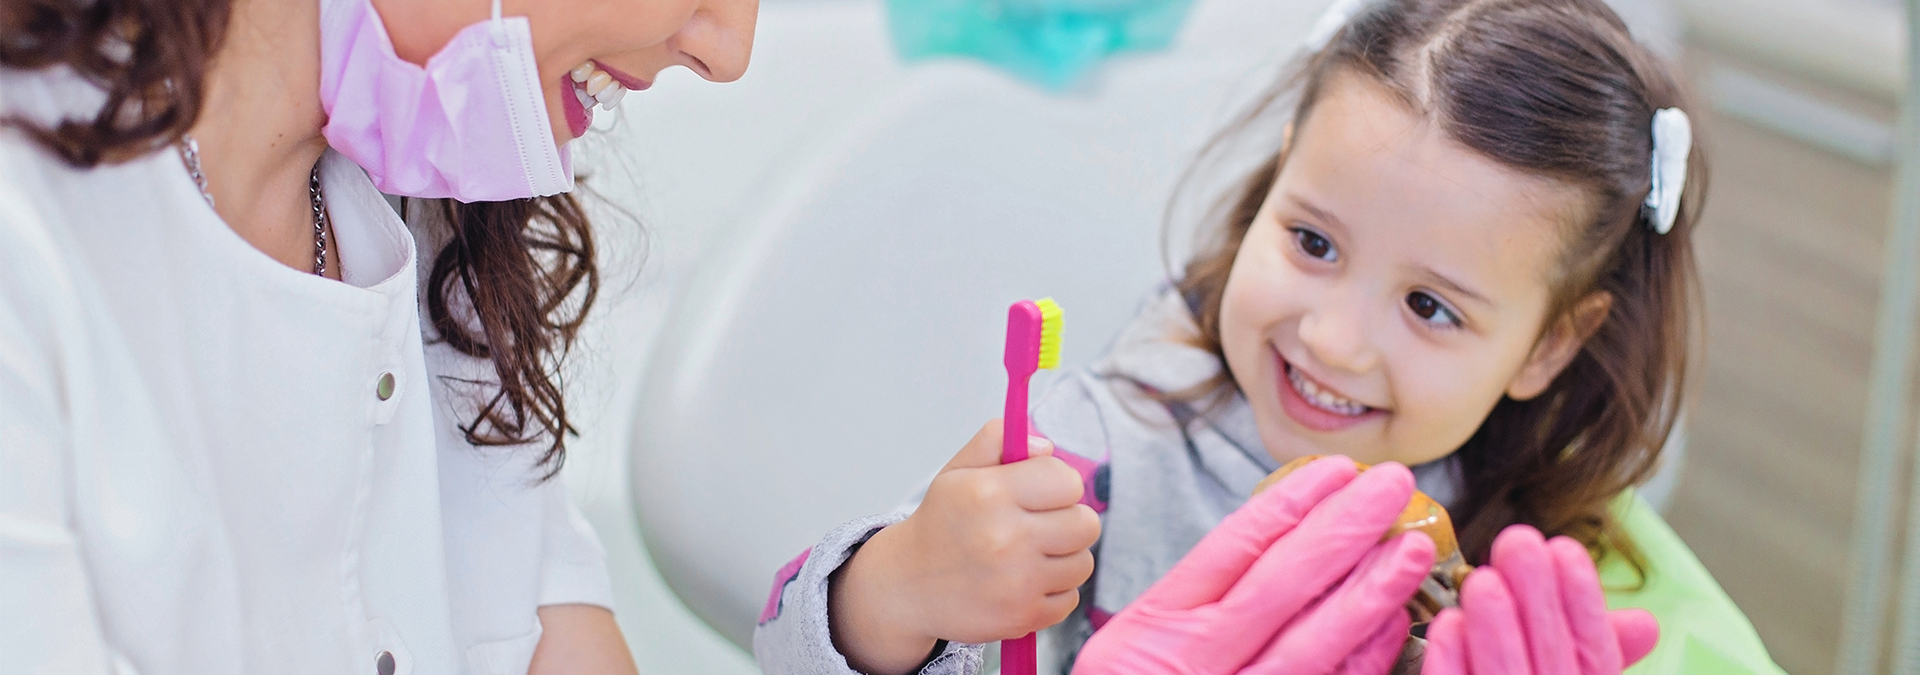 Provider giving young girl a toothbrush